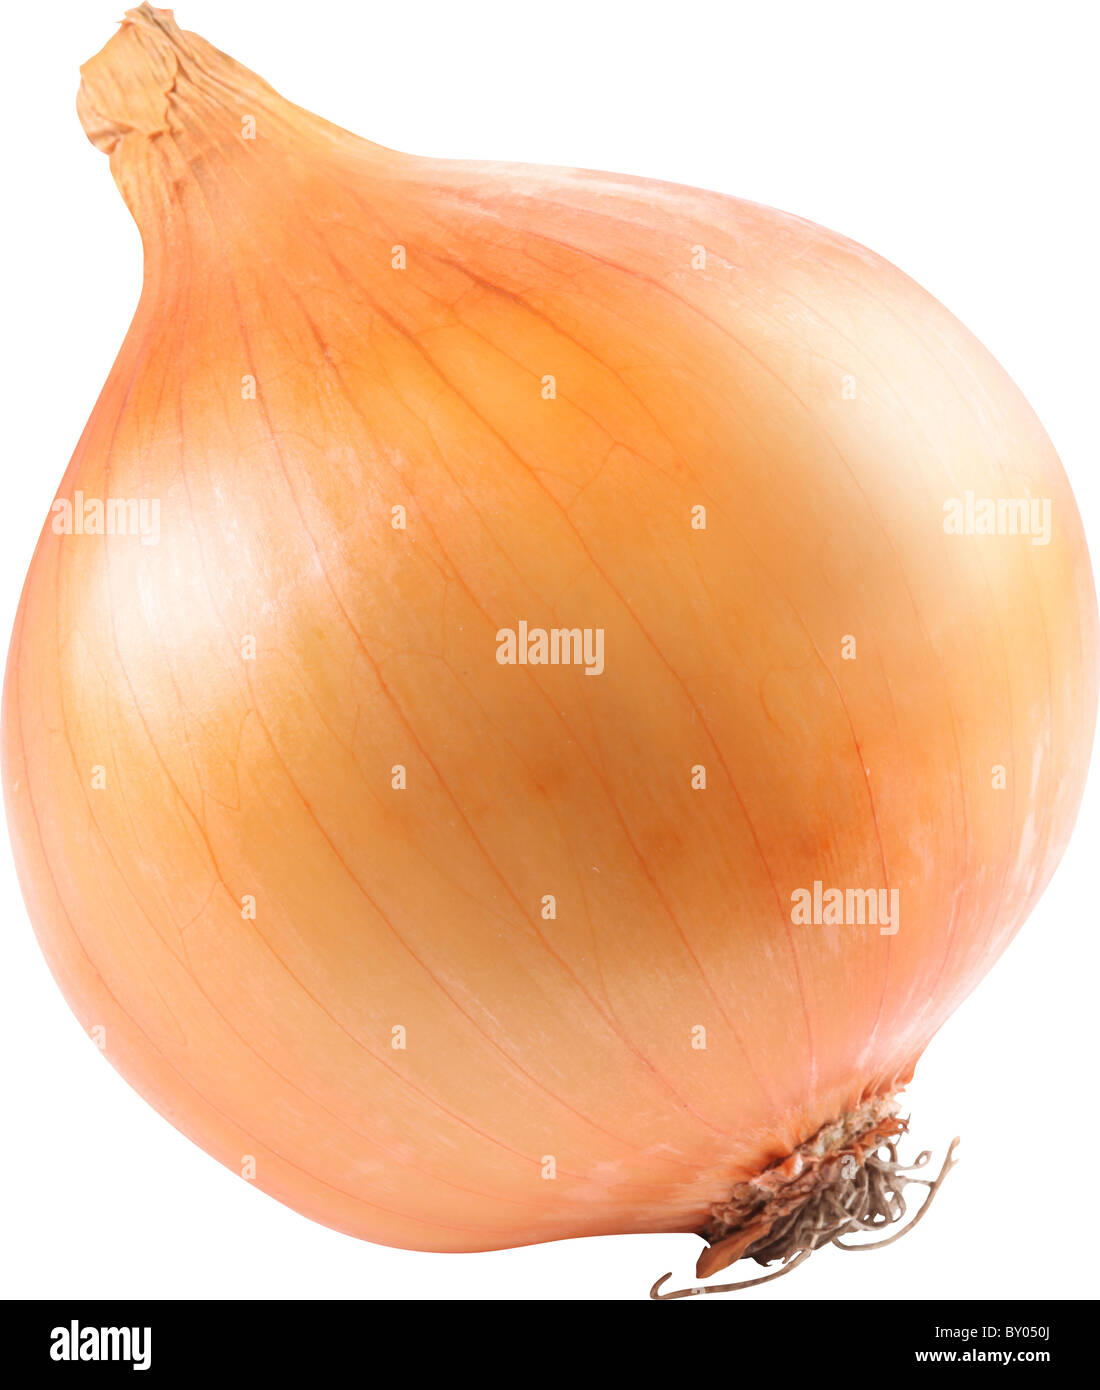 Image of onion on white background. The file contains a path to cut. Stock Photo